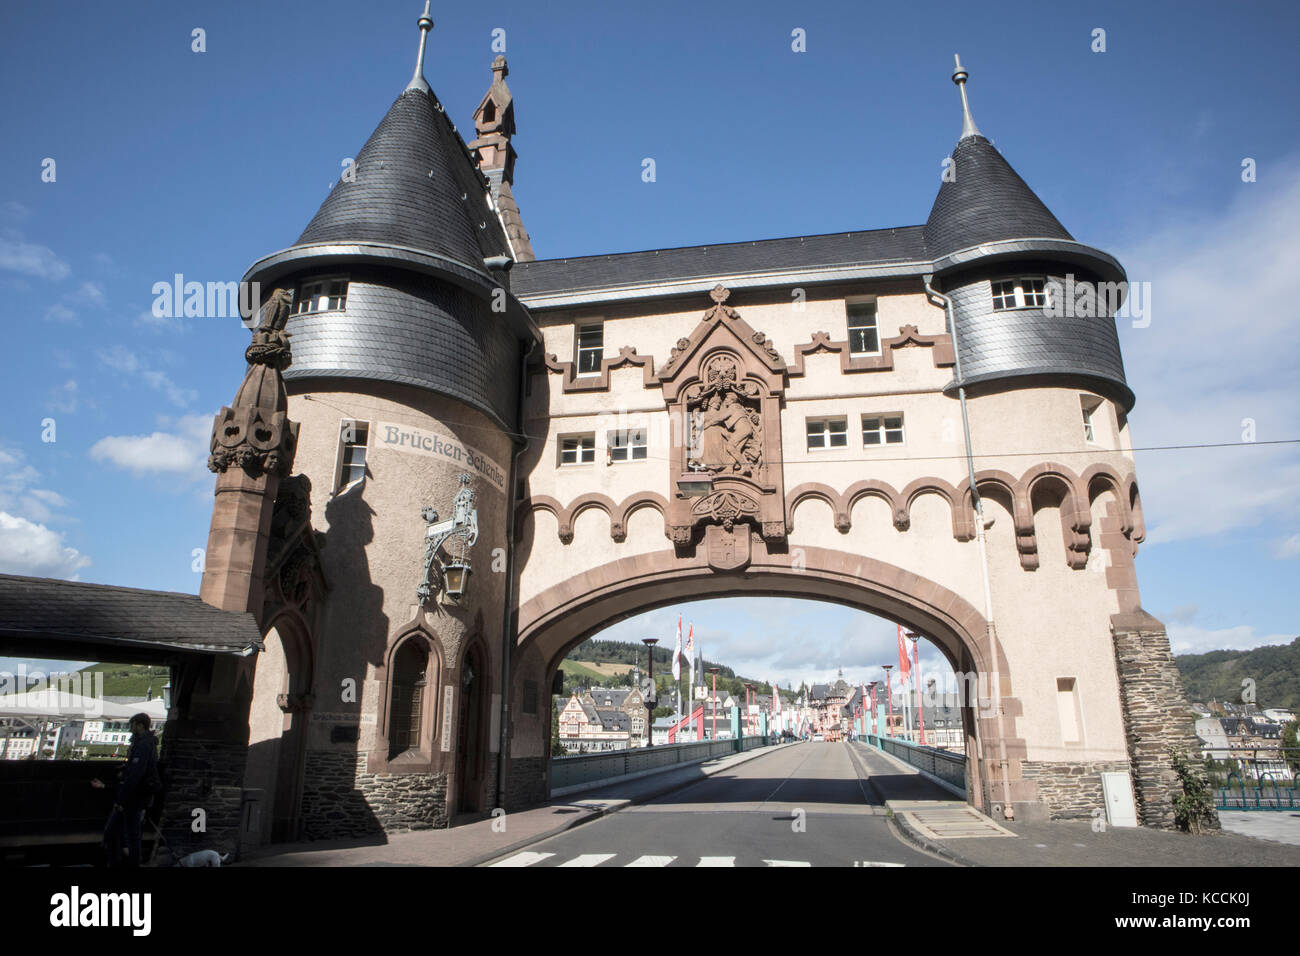 Entrance towers to the town of Traben-Trarbach, in the Mosel Valley, Germany Stock Photo